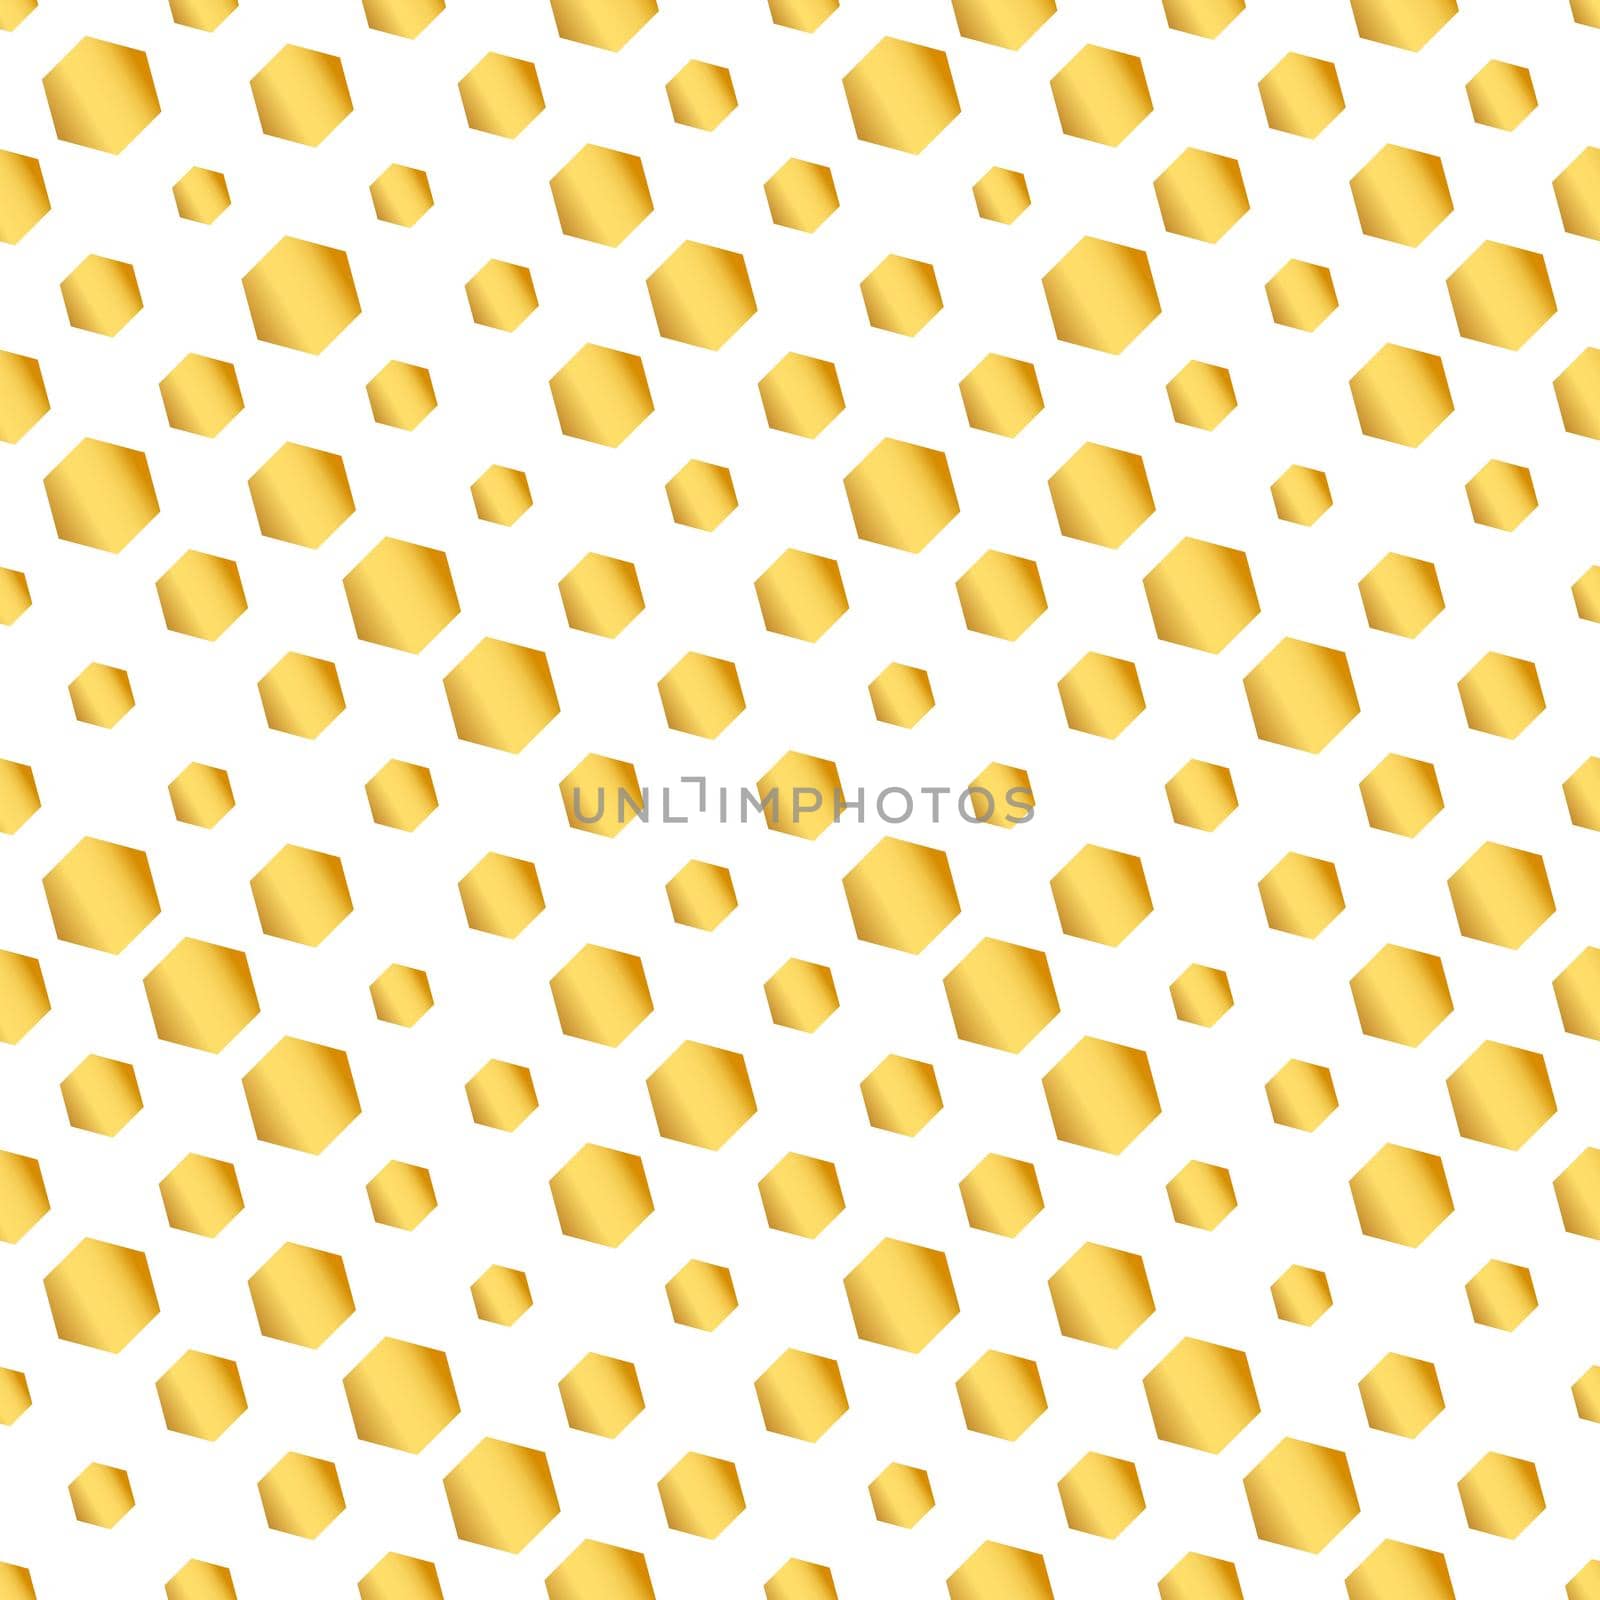 Seamless pattern with color honeycomb shapes on white background. Template texture for invitation, poster, card, banner, announcements and others. Vector illustration